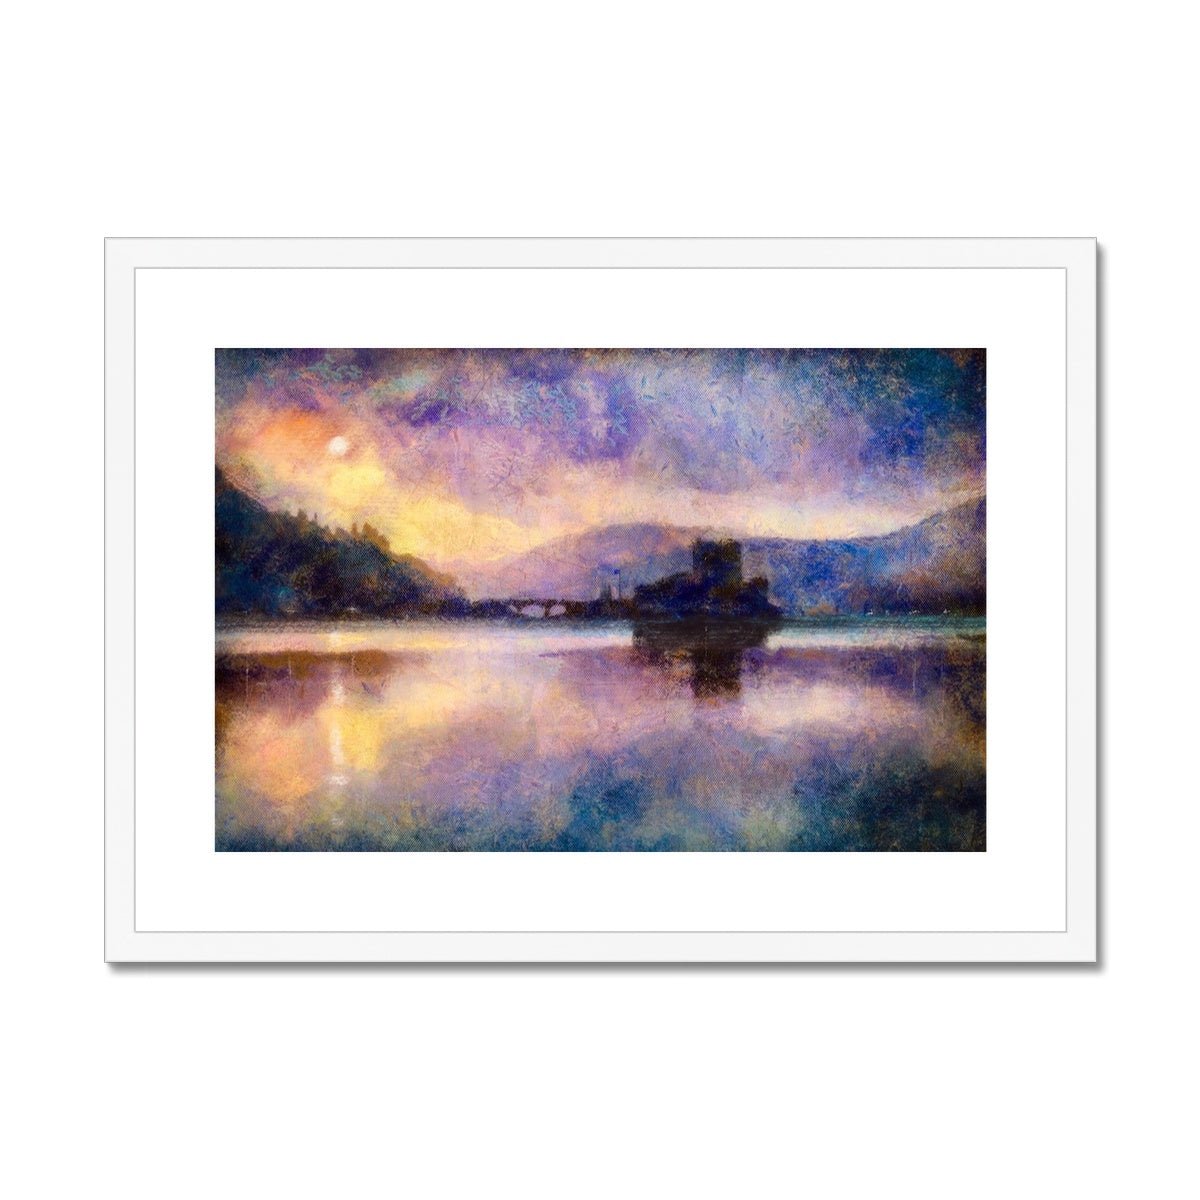 Eilean Donan Castle Moonlight Painting | Framed & Mounted Prints From Scotland-Framed & Mounted Prints-Historic & Iconic Scotland Art Gallery-A2 Landscape-White Frame-Paintings, Prints, Homeware, Art Gifts From Scotland By Scottish Artist Kevin Hunter